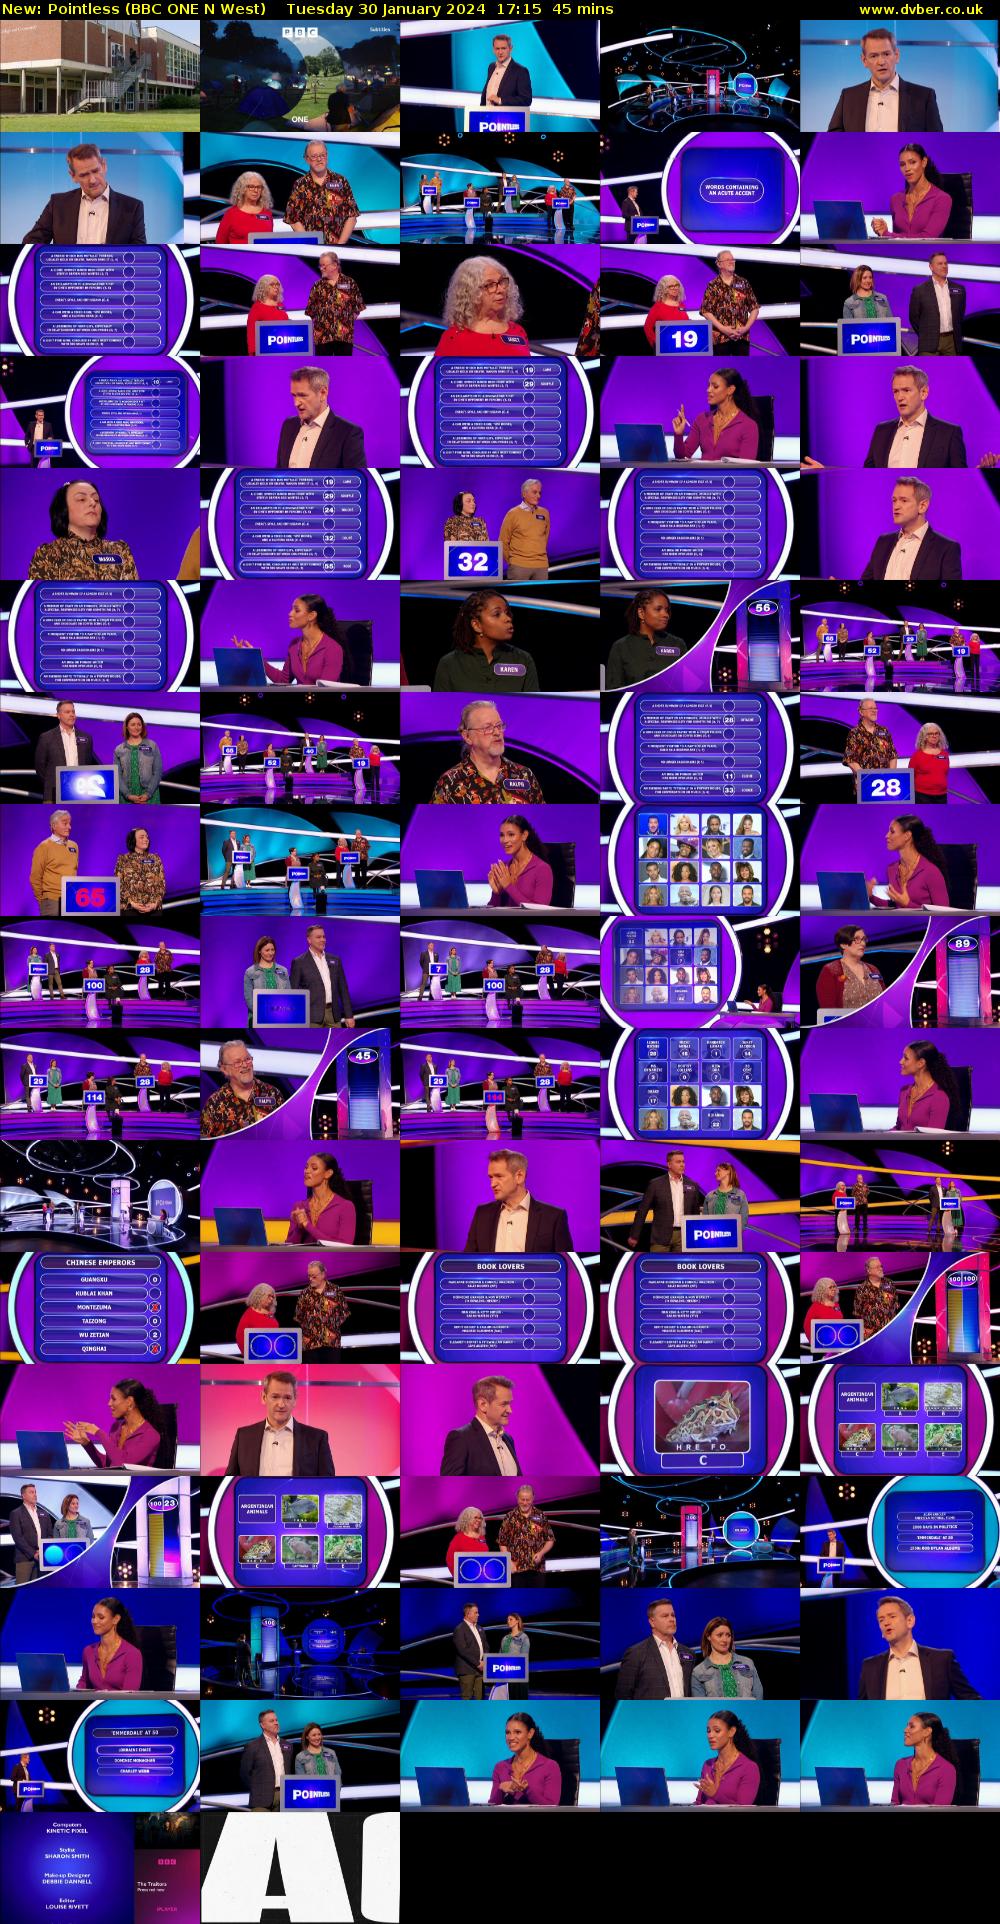 Pointless (BBC ONE N West) Tuesday 30 January 2024 17:15 - 18:00